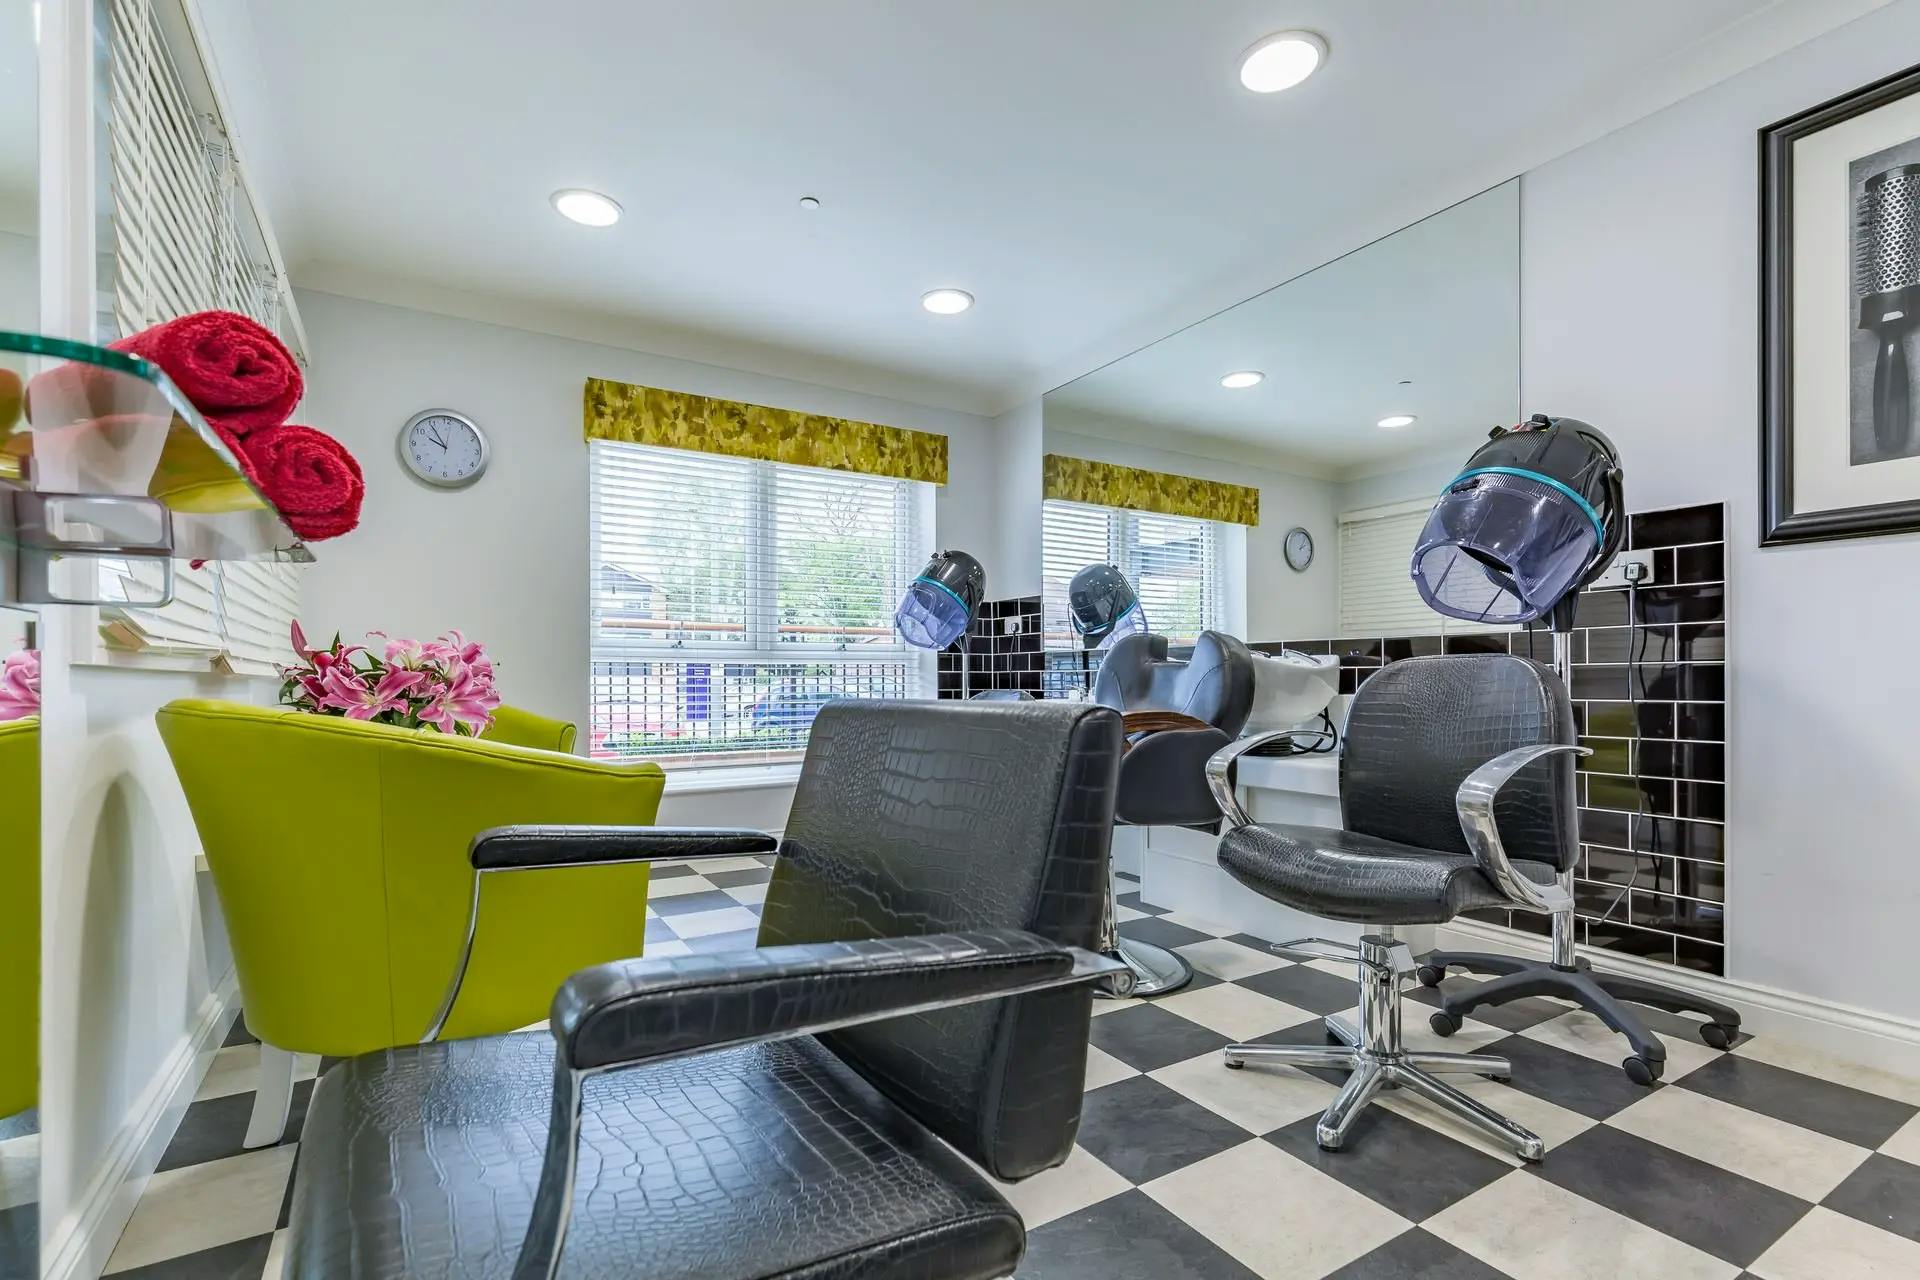 Salon at Belmont House Care Home in Sutton, Greater London